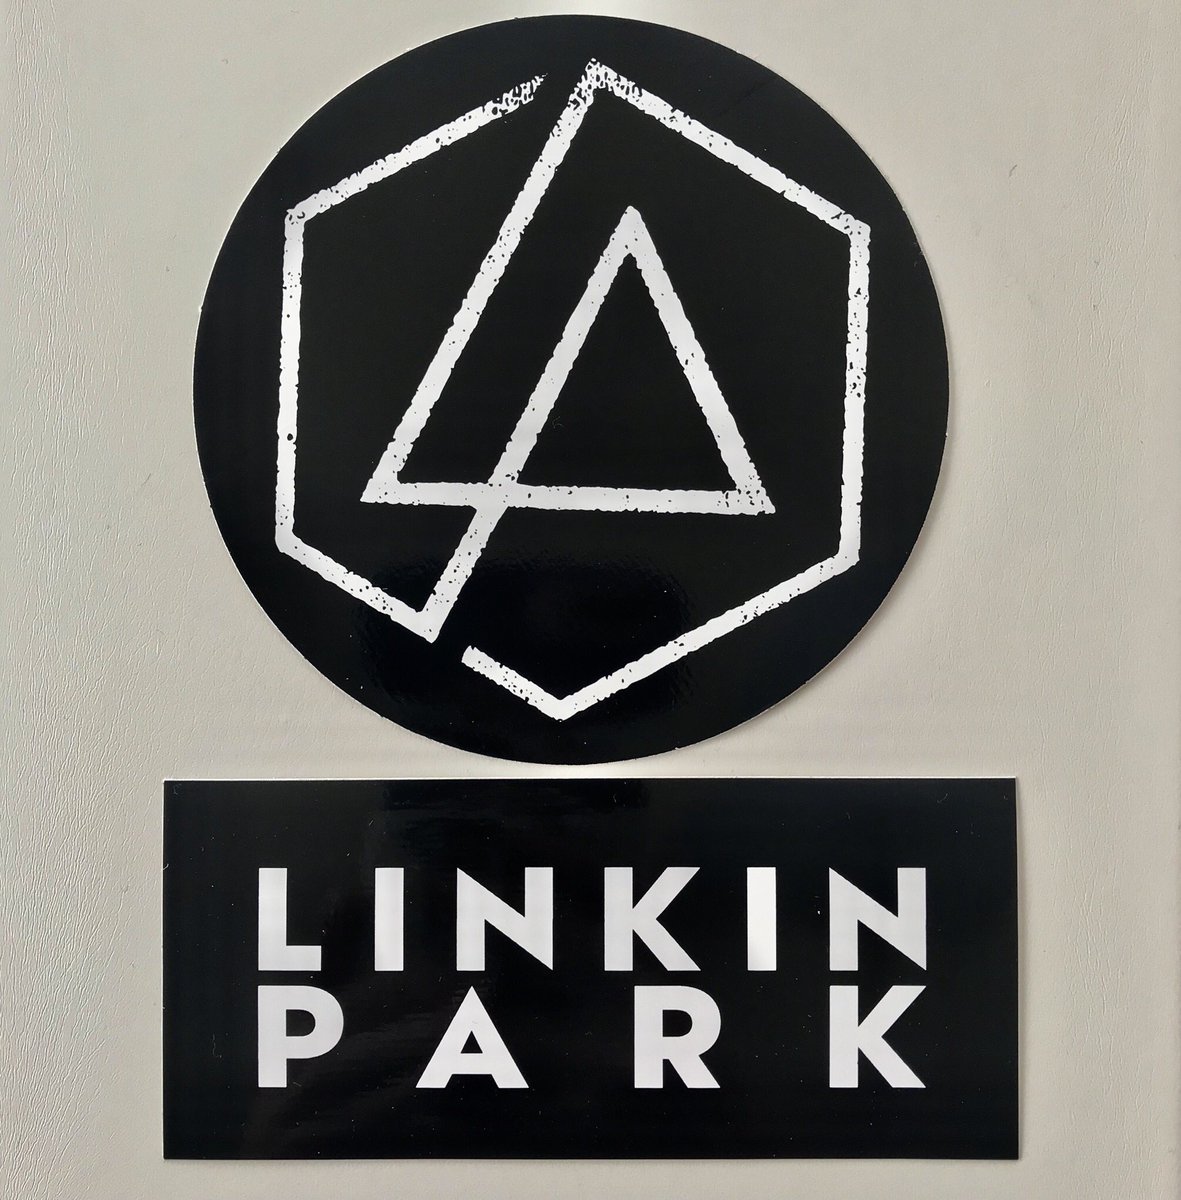 Linkin Park Japan Di Twitter 1st Anniversary Giveaway 1周年記念プレゼント This Giveaway Is For Linkin Park Fans Who Live In Japan Linkin Parkファンの皆さんに感謝の気持ちを込めてlpu1 Hybrid Theory Ep1枚とlpロゴステッカー2種類1組をプレゼントし